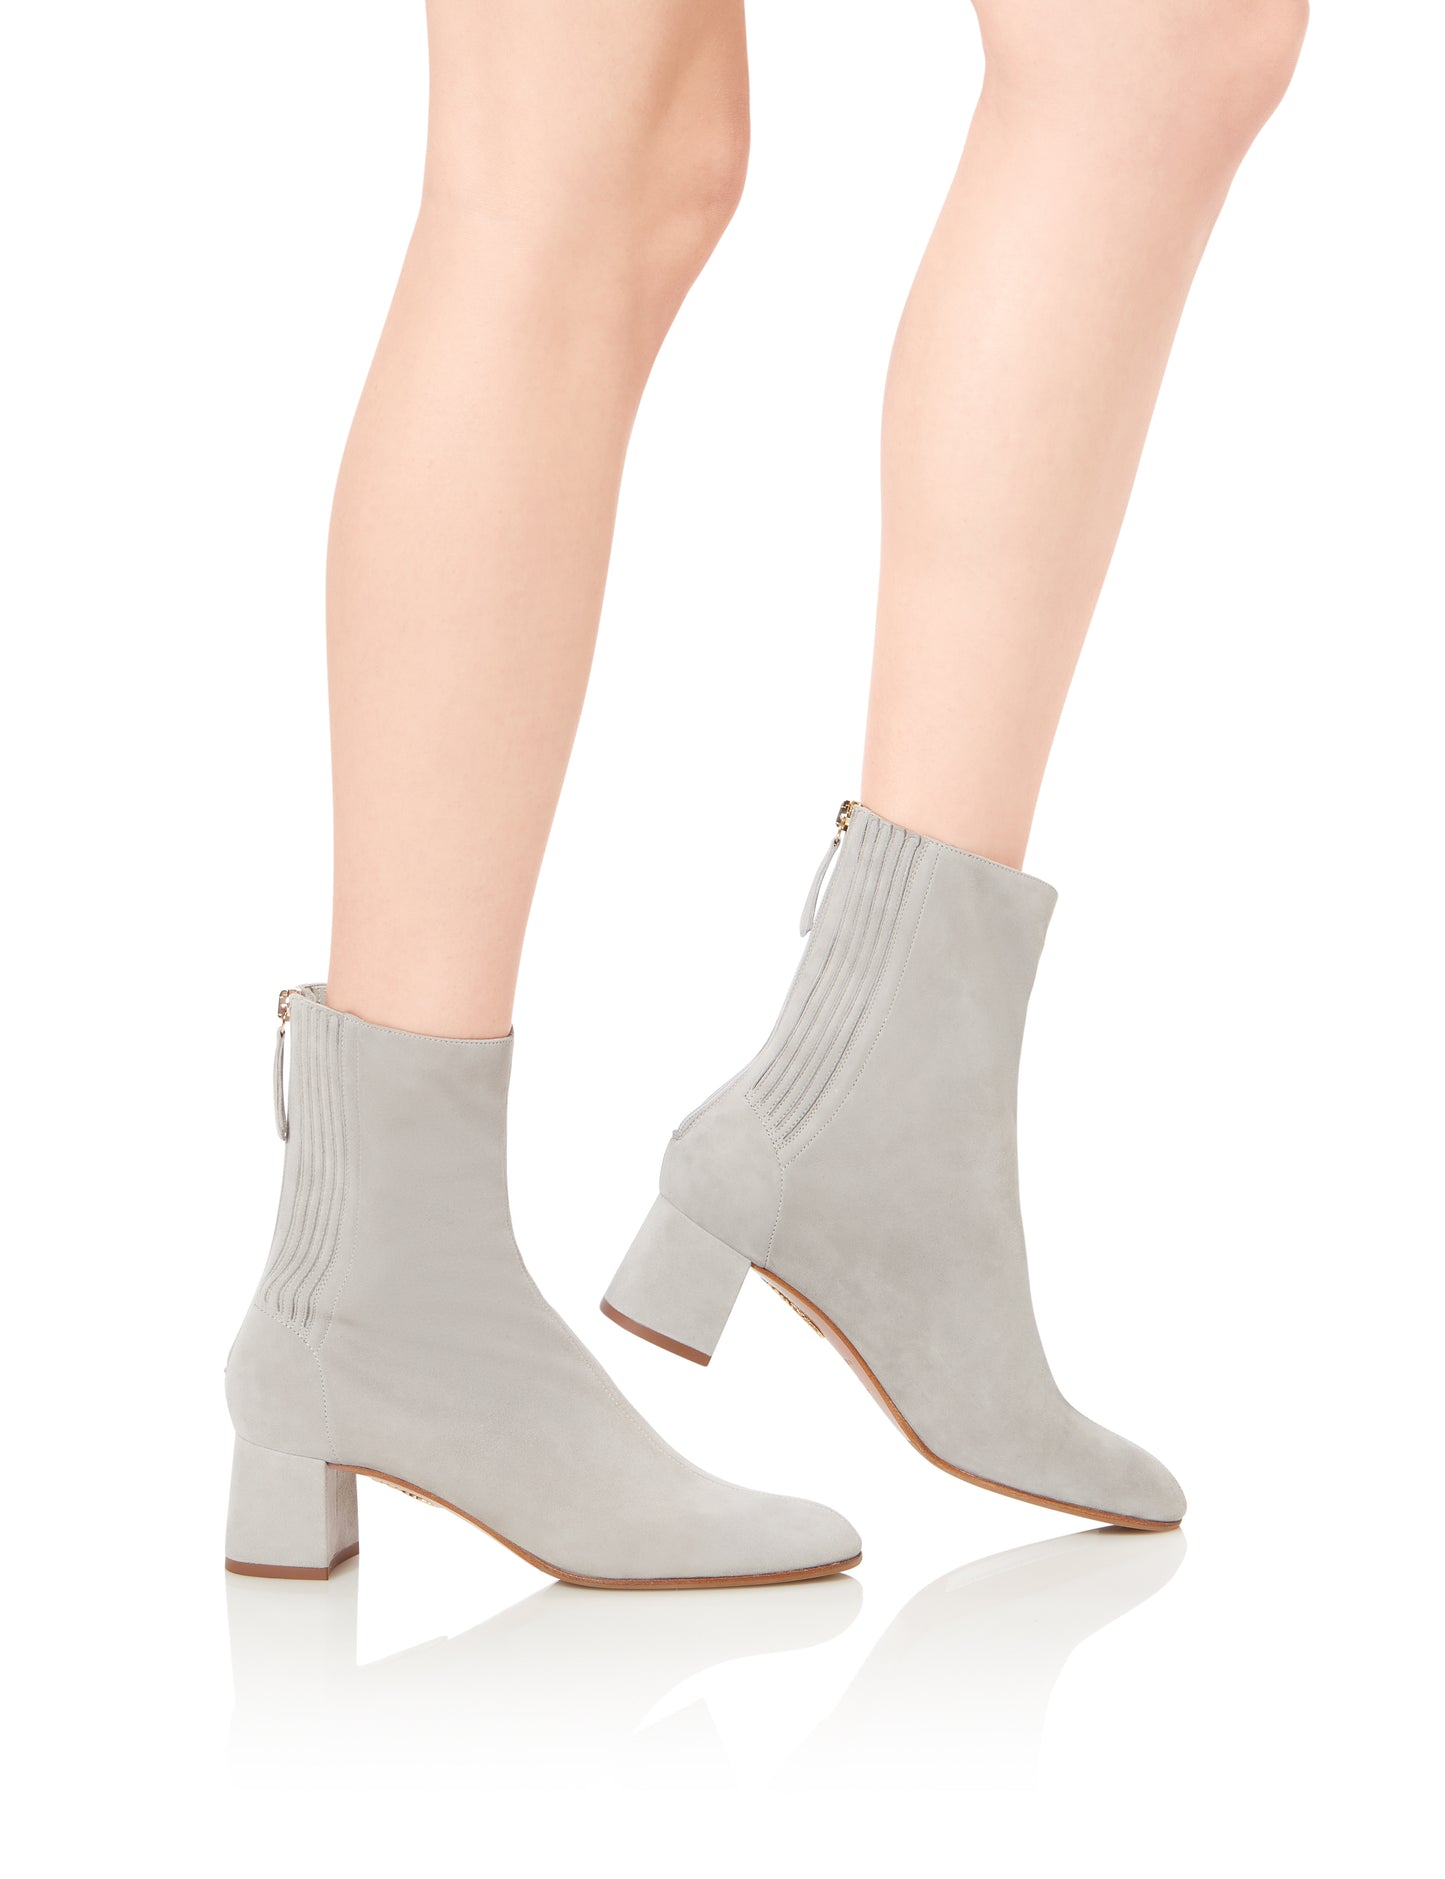 SAINT HONORE  BOOTIE 50 COOL GRAY